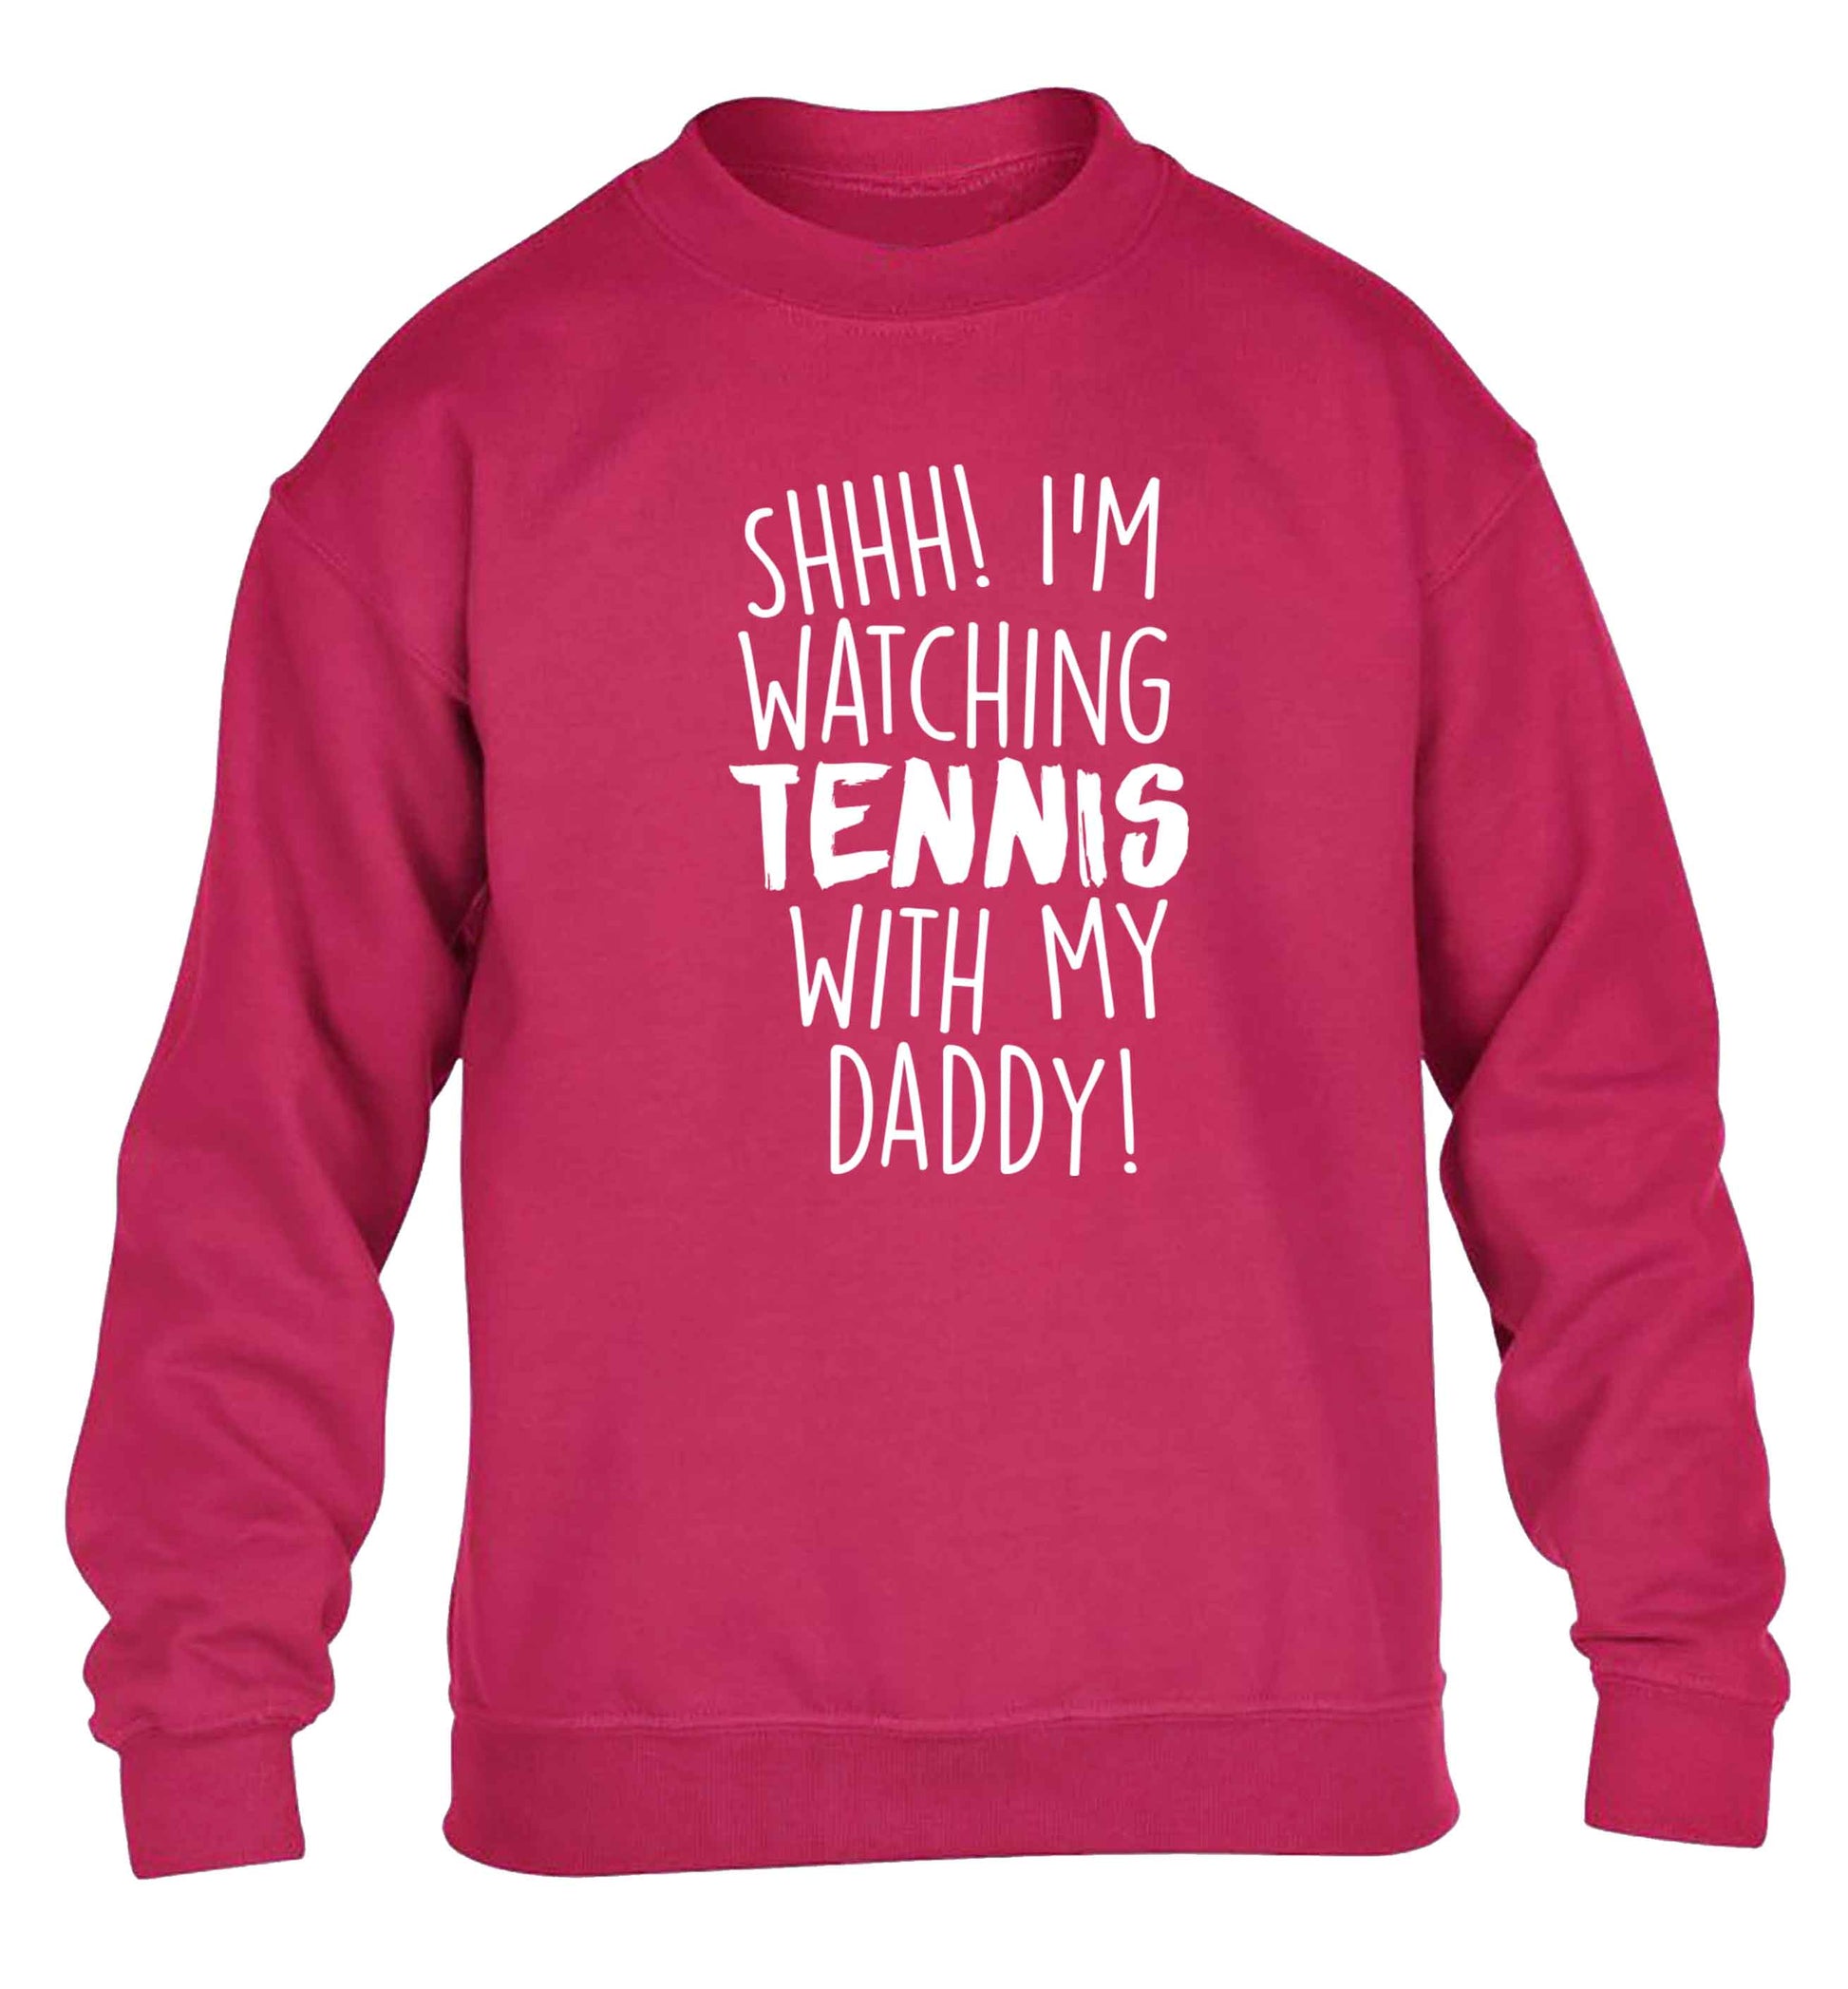 Shh! I'm watching tennis with my daddy! children's pink sweater 12-13 Years